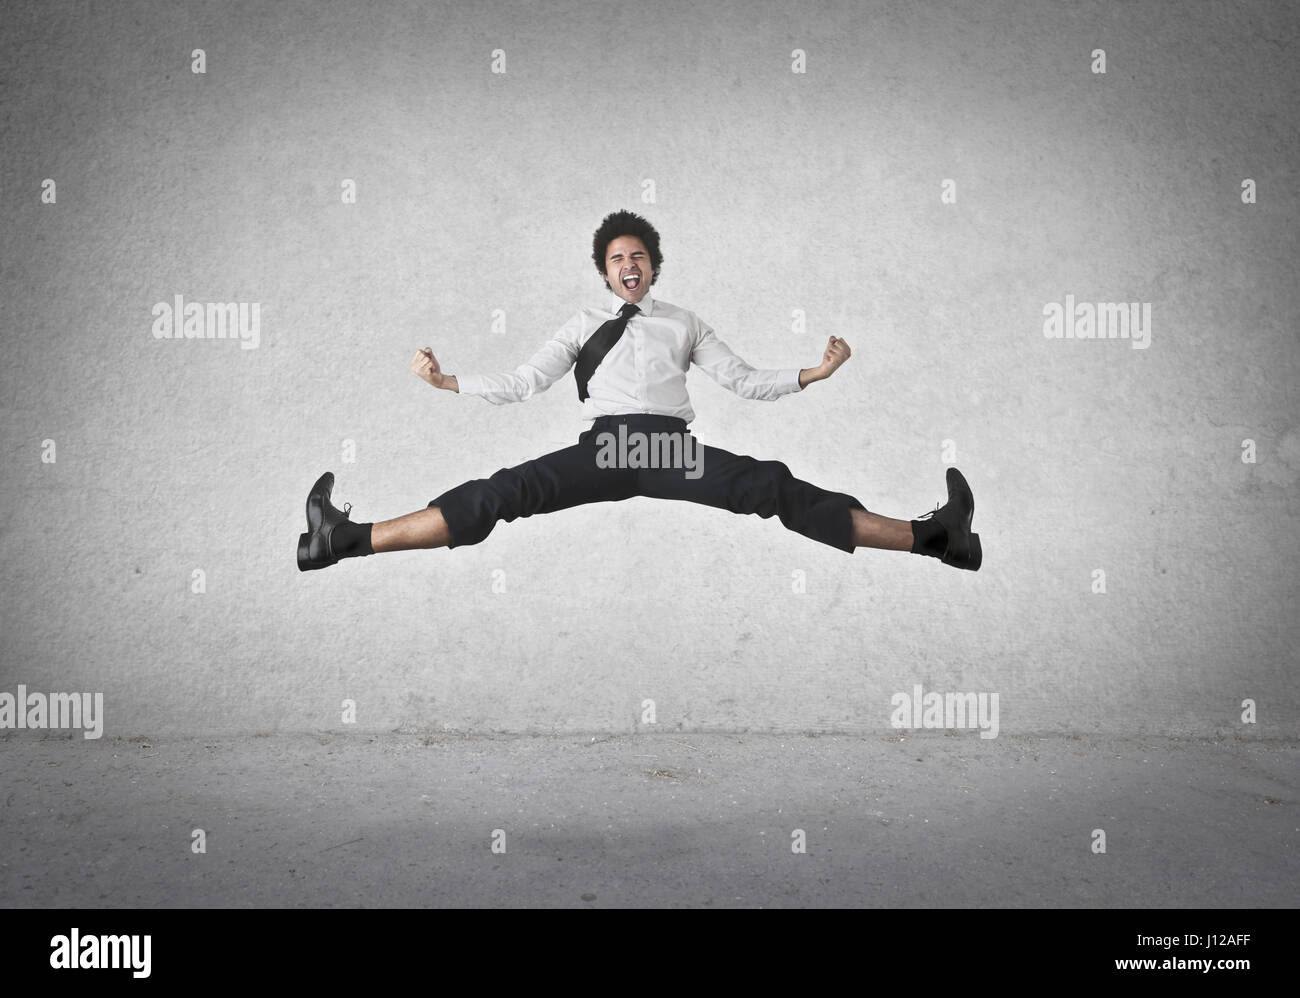 Man jumping and doing a split Stock Photo